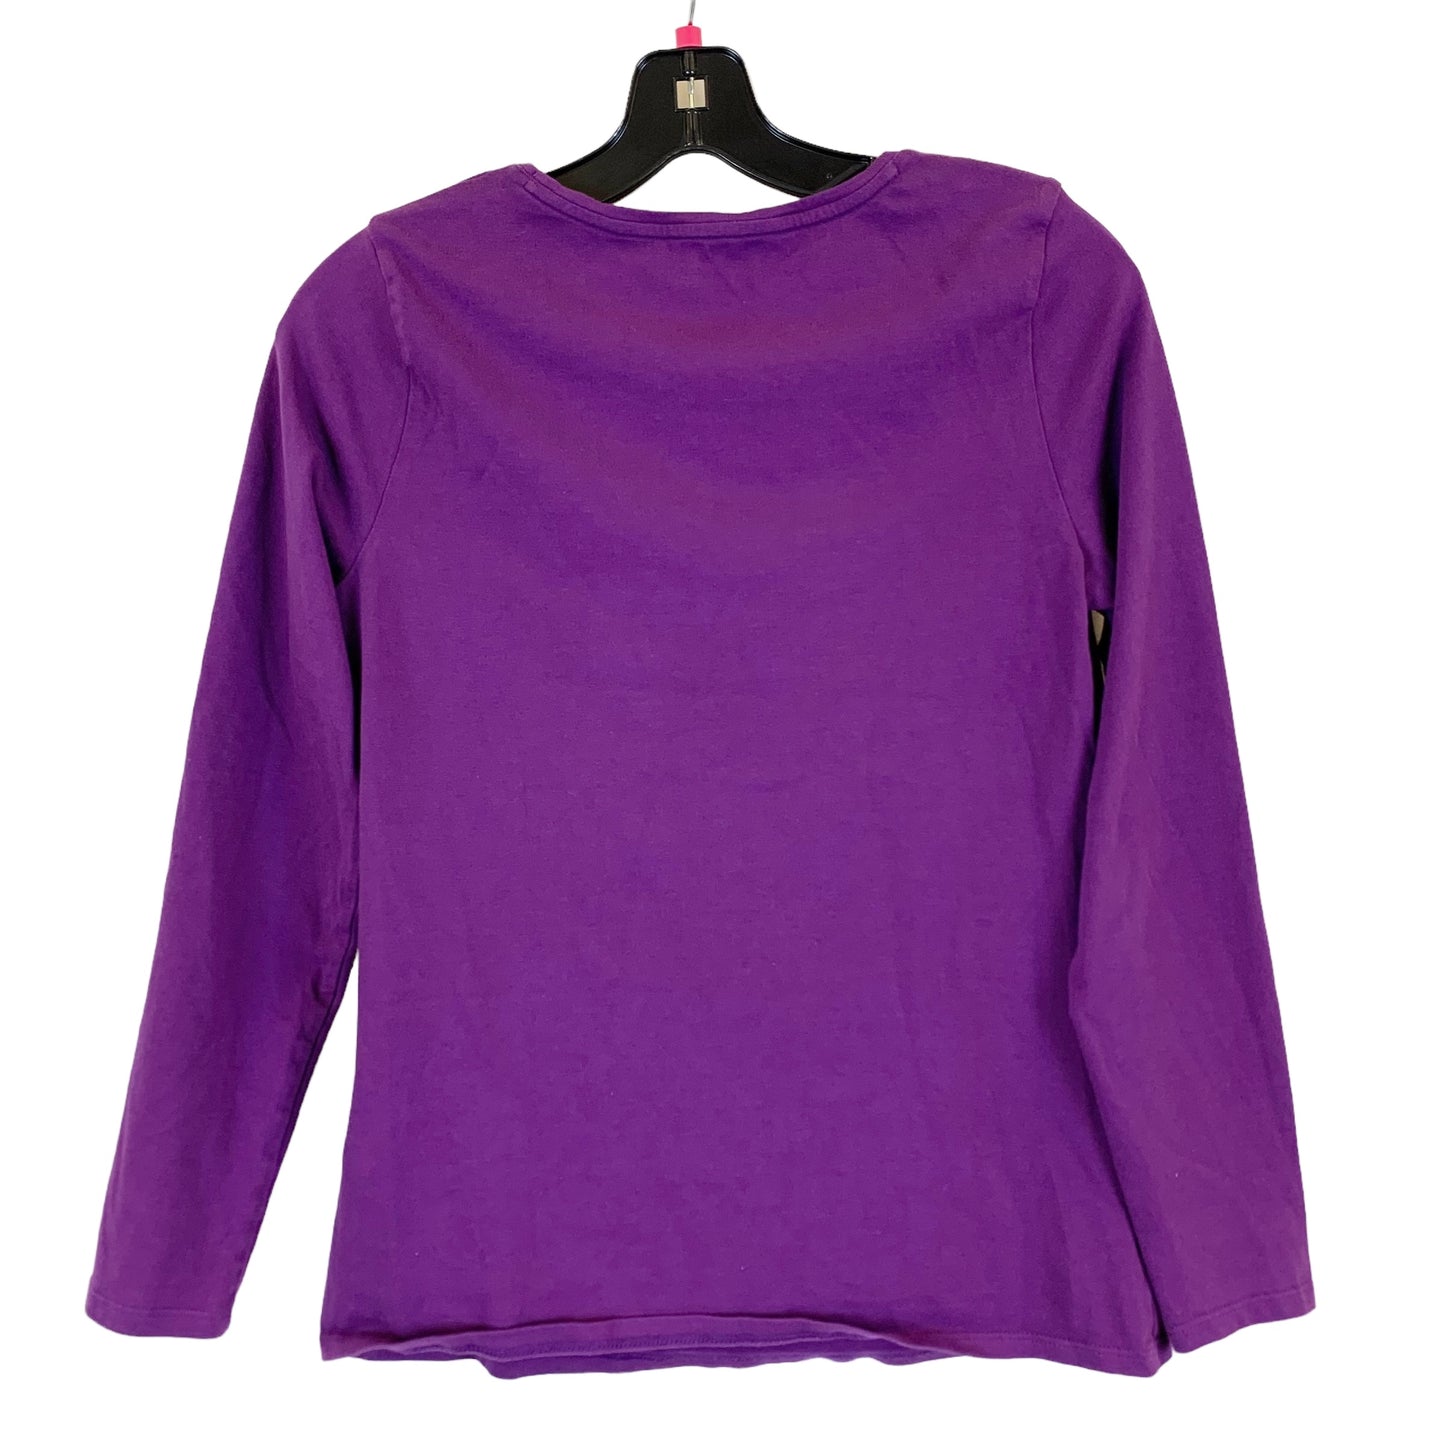 Top Long Sleeve Basic By Coldwater Creek  Size: S